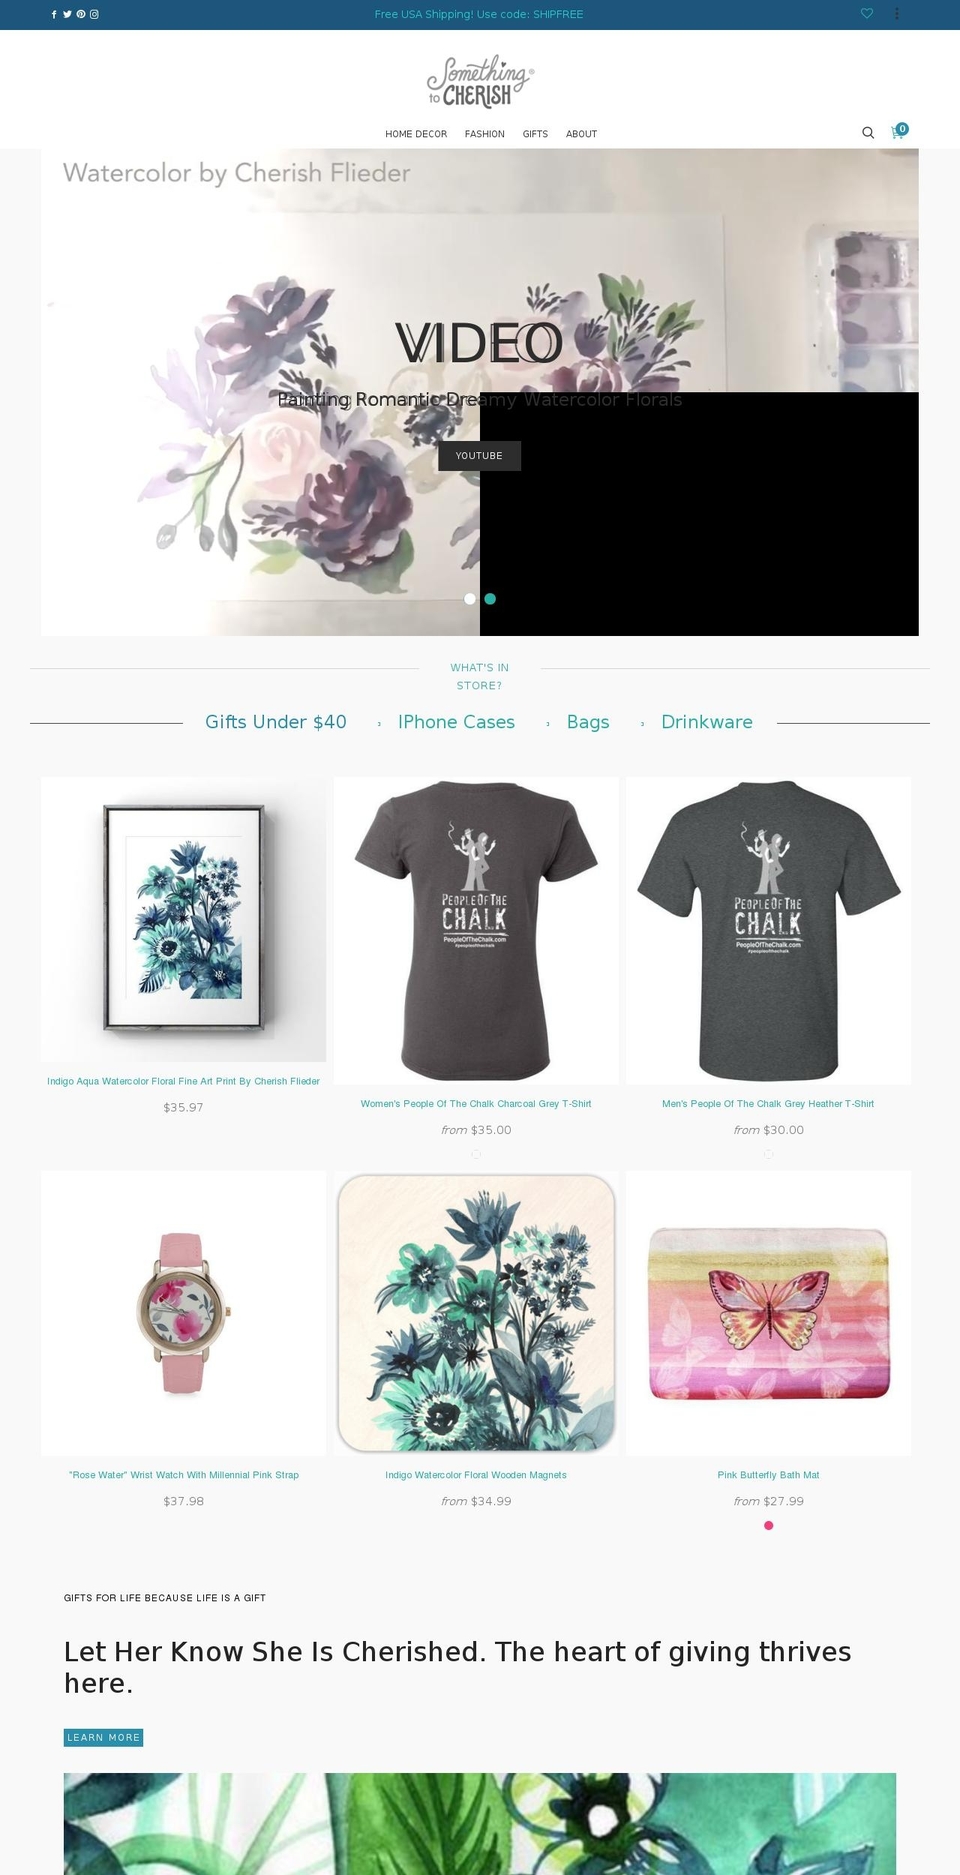 cleversoft-ione-myshopify-3-6-0 Shopify theme site example cherishart.com